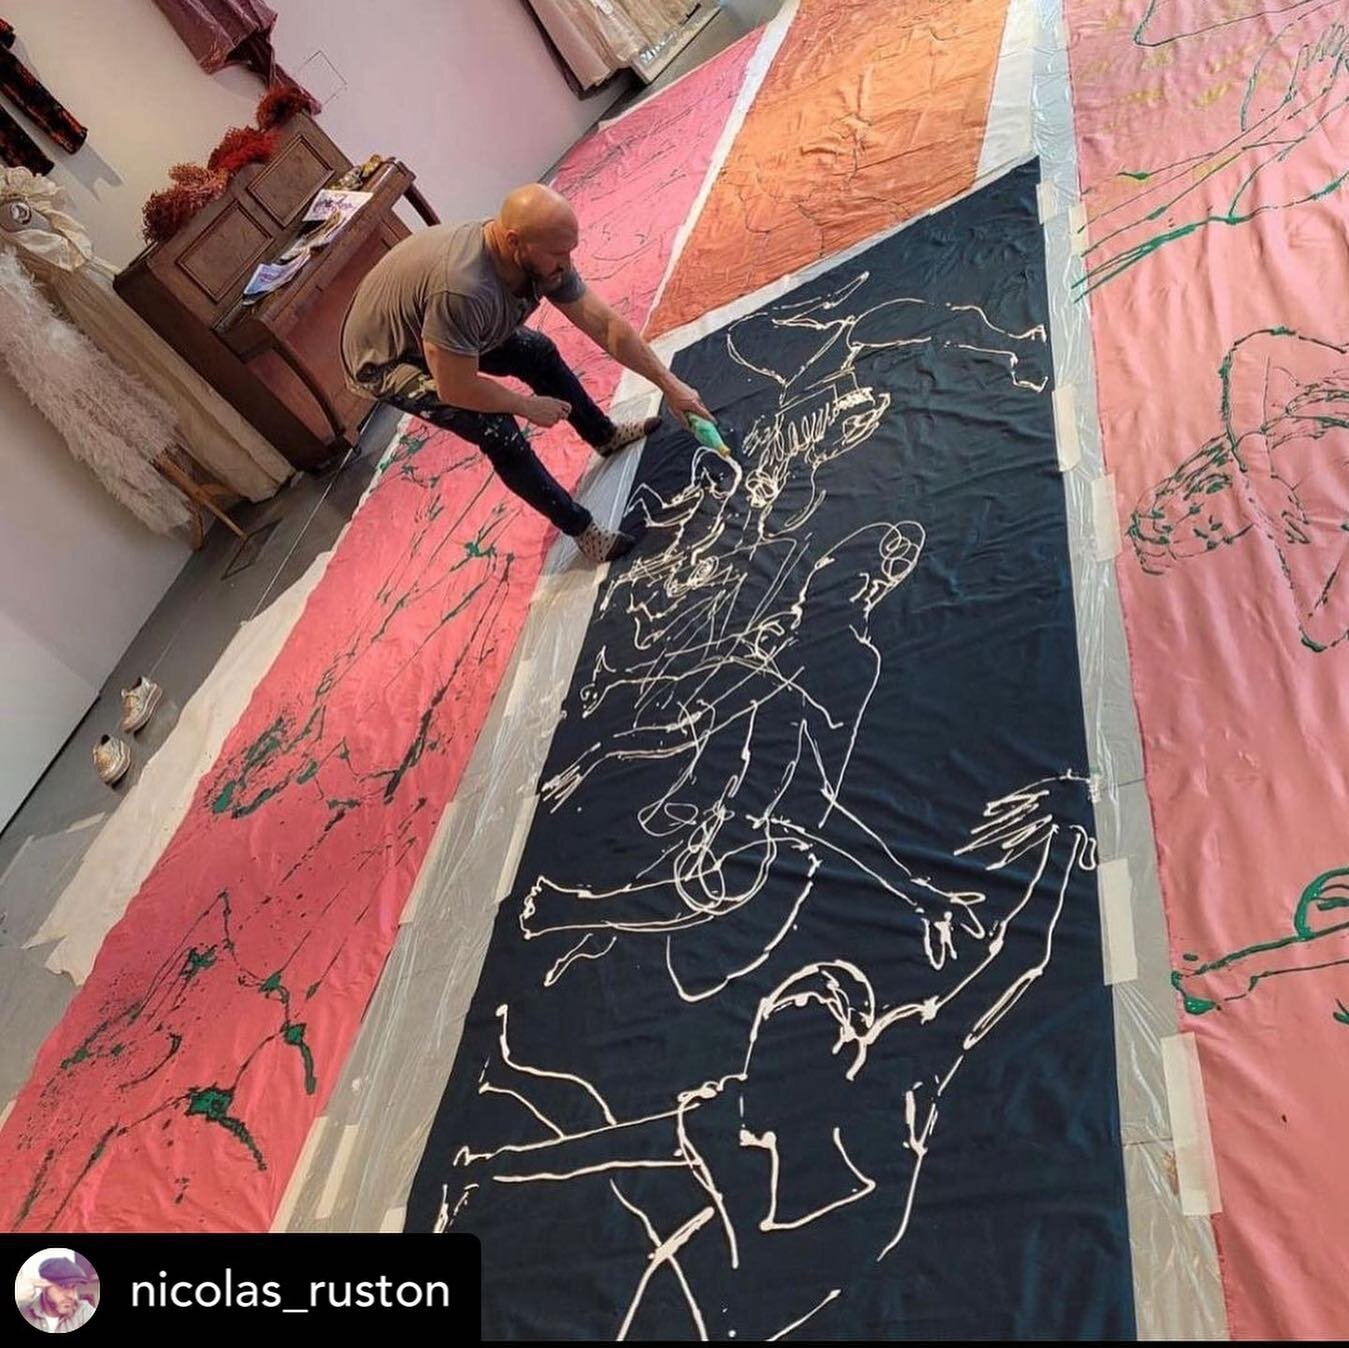 Love the striking sense of motion in these new works created by Nicolas Ruston in a recent live art painting session with Lulu Liu couture design at Artytude.
.
@nicolas_ruston I made some new paintings recently - The paintings are a collab with fash